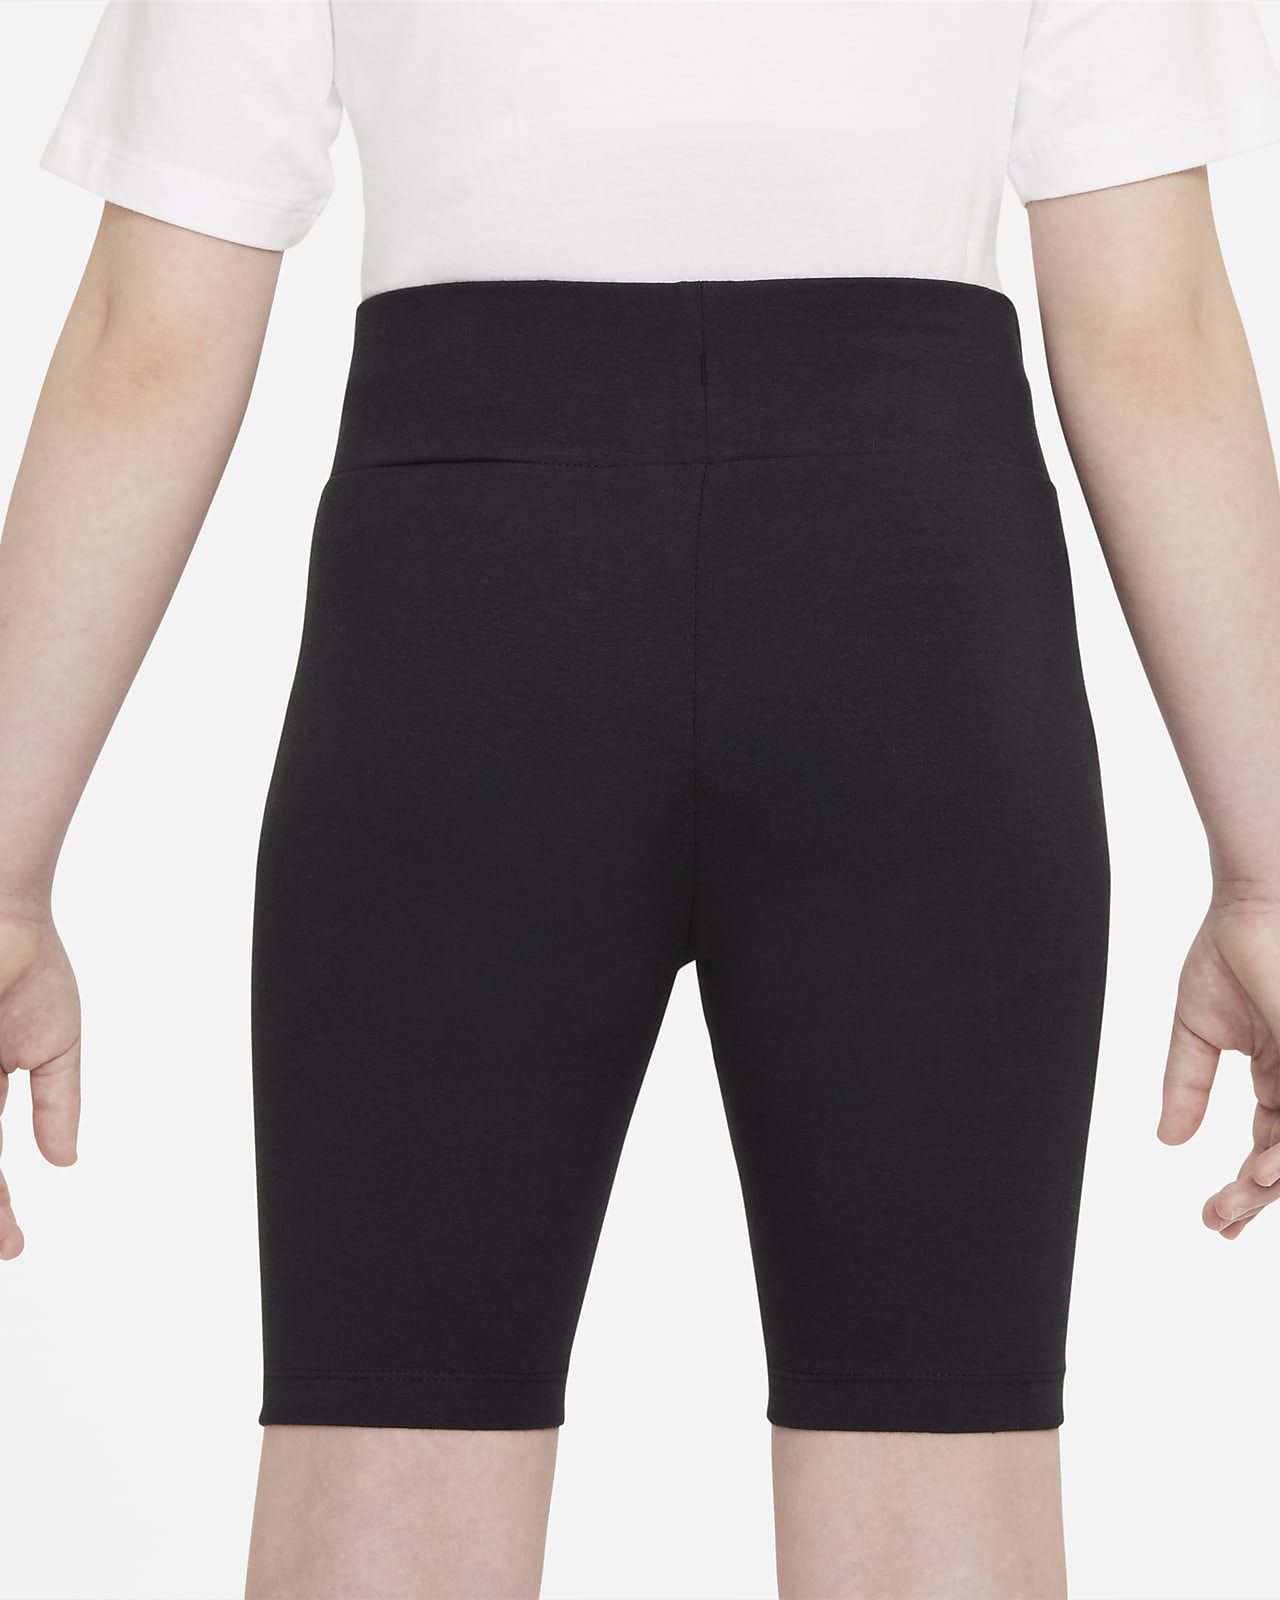 Look-It Activewear Black Cotton Shorts for Gymnastics Or Dance Girls and Women 